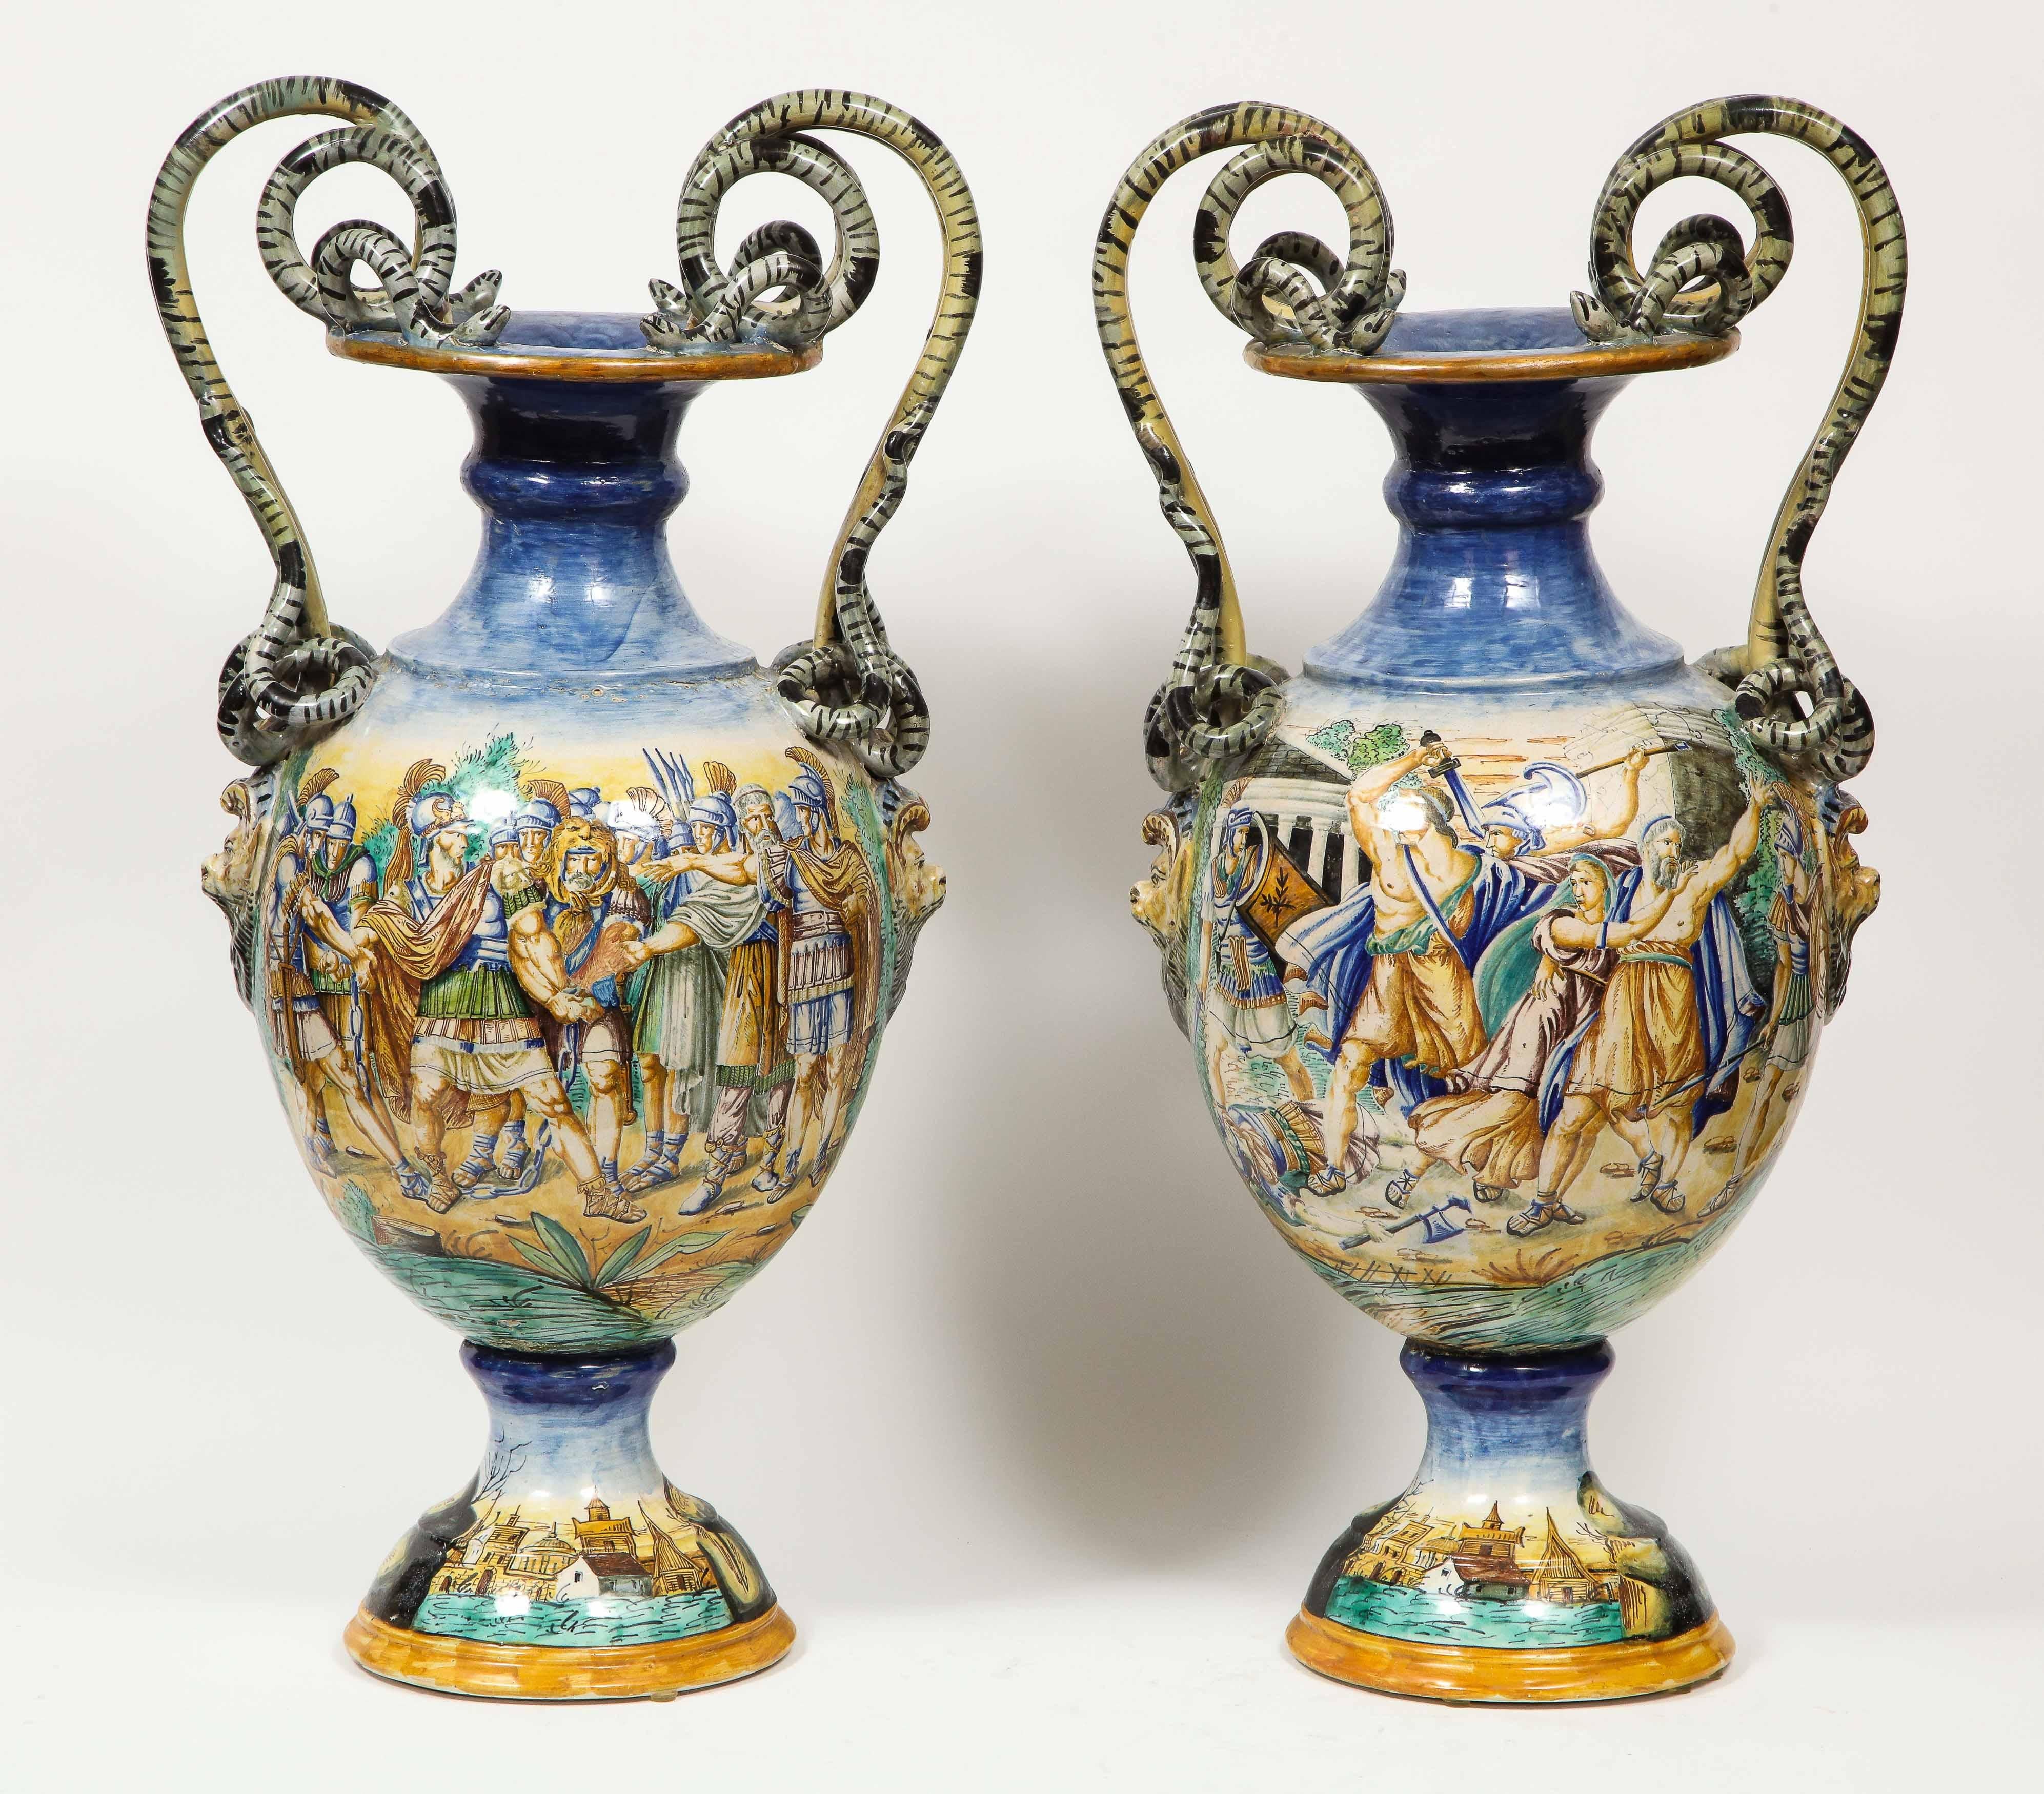 An Imposing pair of large antique Italian Majolica snake-handled vases, late 19th century.

With very fine hand painted classical and biblical scenes and grotesque faces in relief to the sides beneath each detailed snake handle.

Similar to work